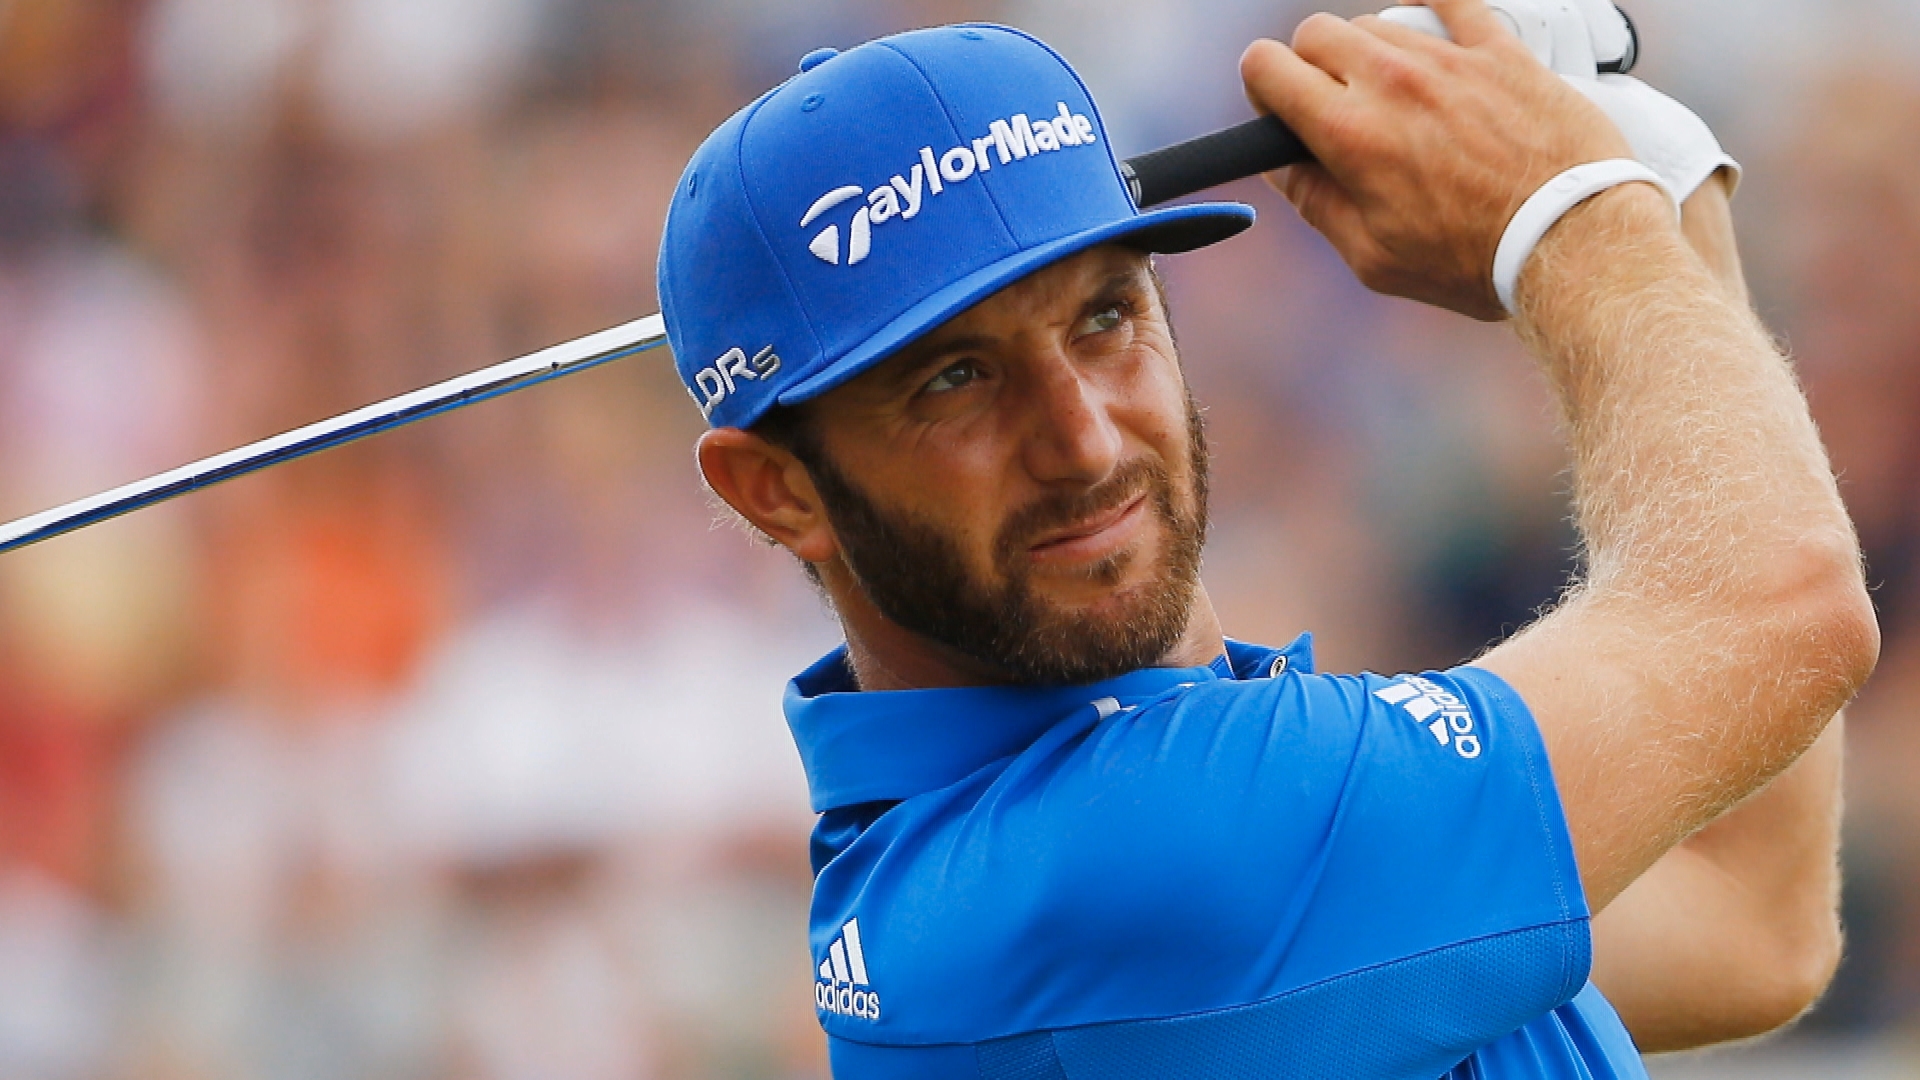 Dustin Johnson Passes All The Tests At WGC Match Play